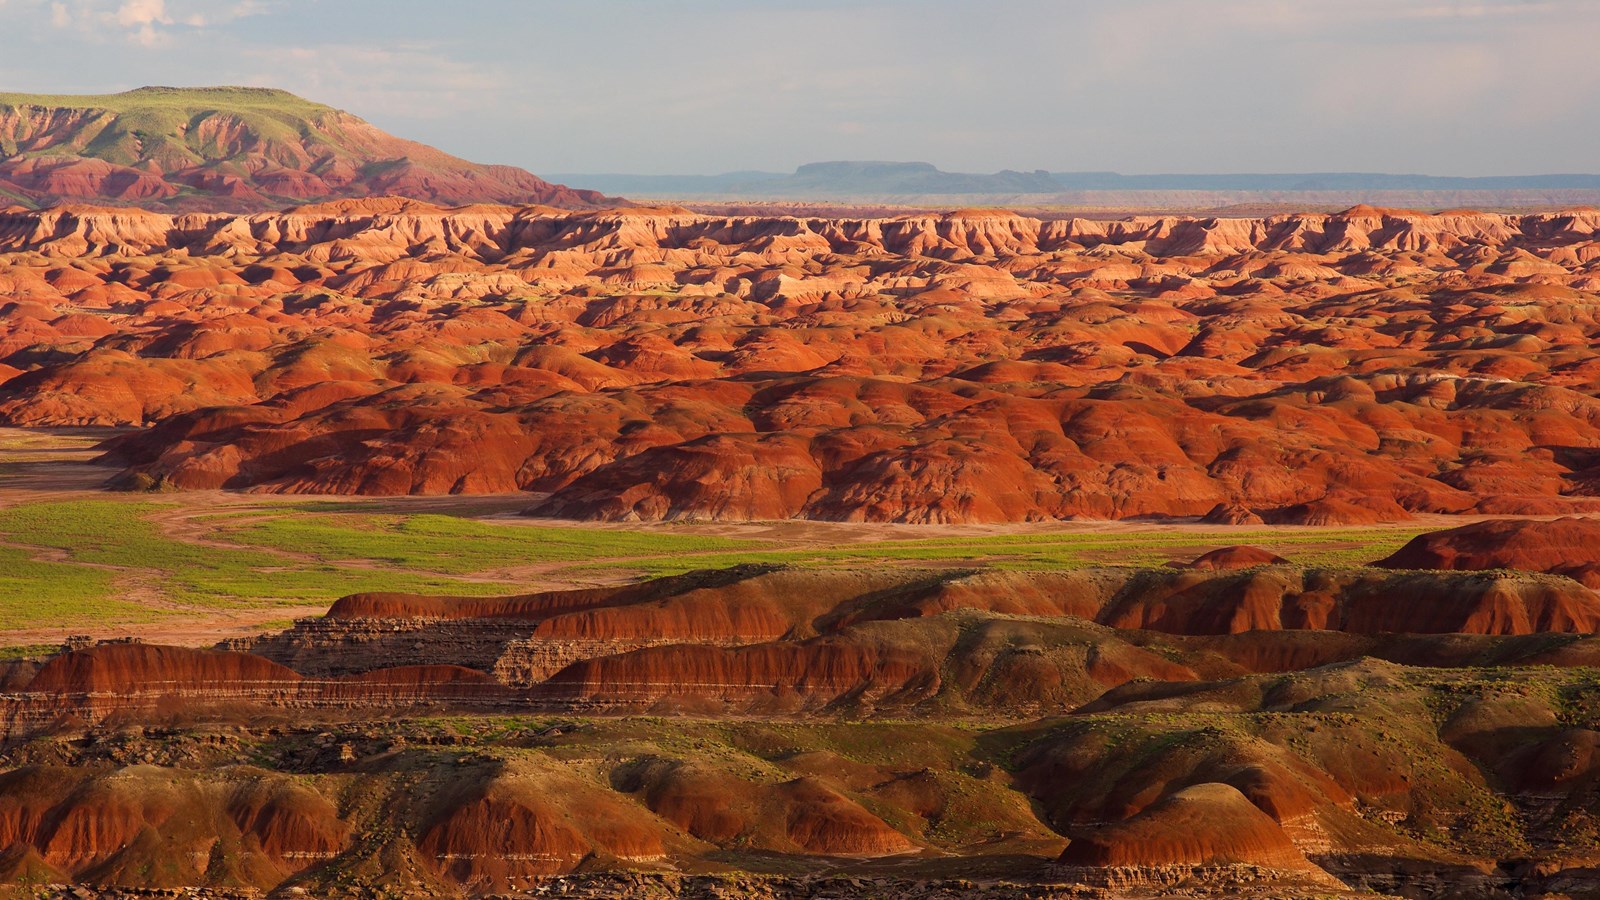 Grasslands fill the spaces between red badlands with mesas in the distance.